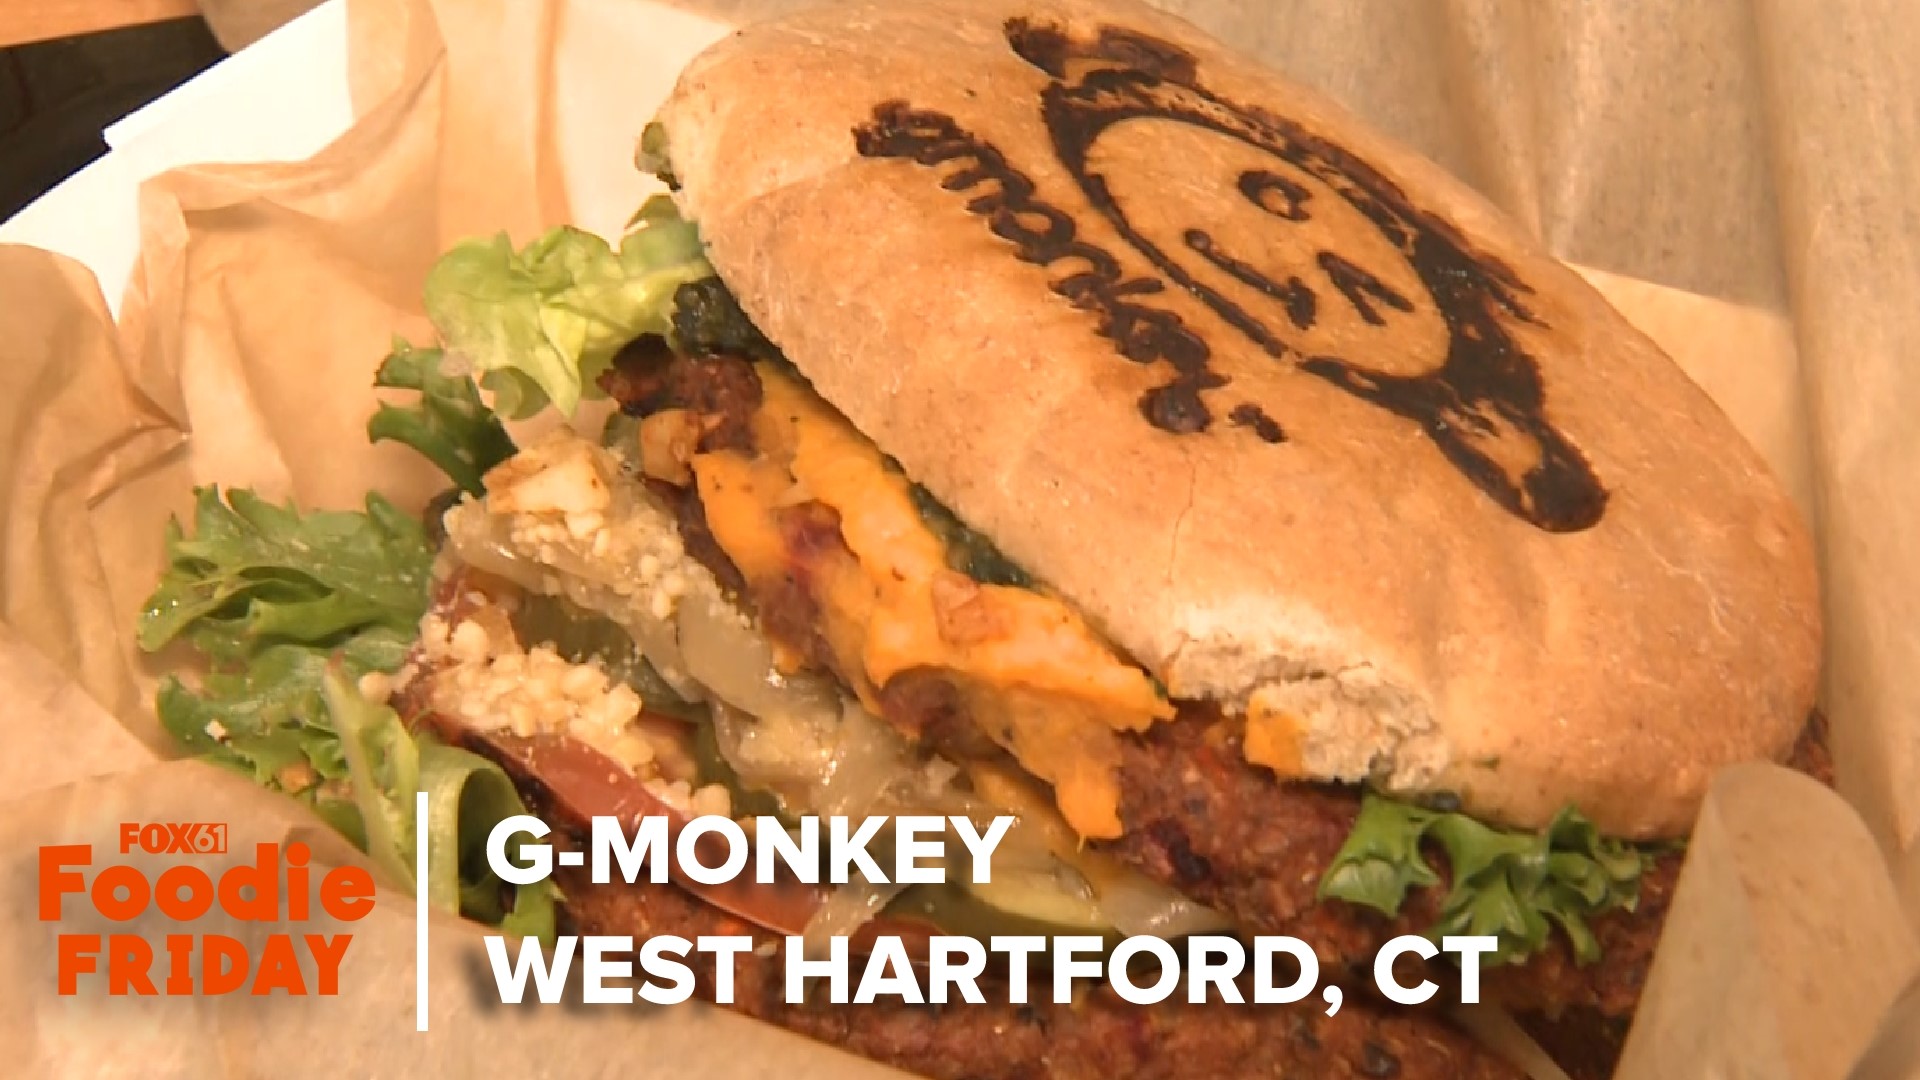 FOX61's Matt Scott visits G-Monkey in West Hartford for Foodie Friday. It's fast food that's healthy and vegan.